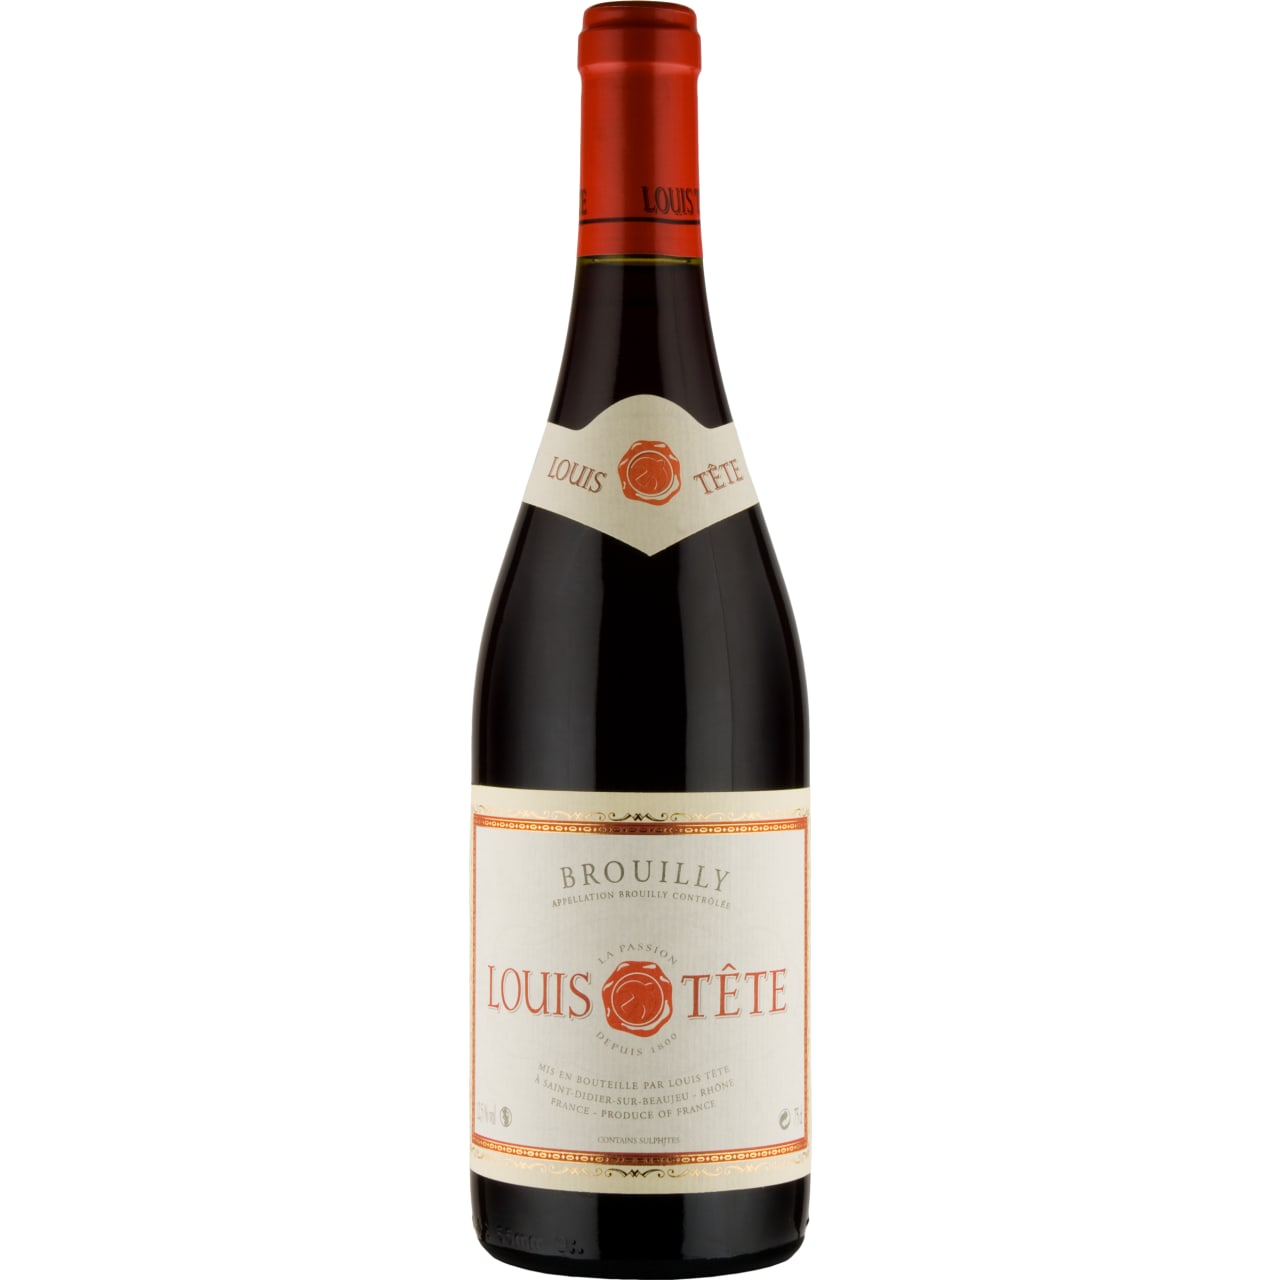 Combines roundness with harmony with notes of strawberries and forest fruits.